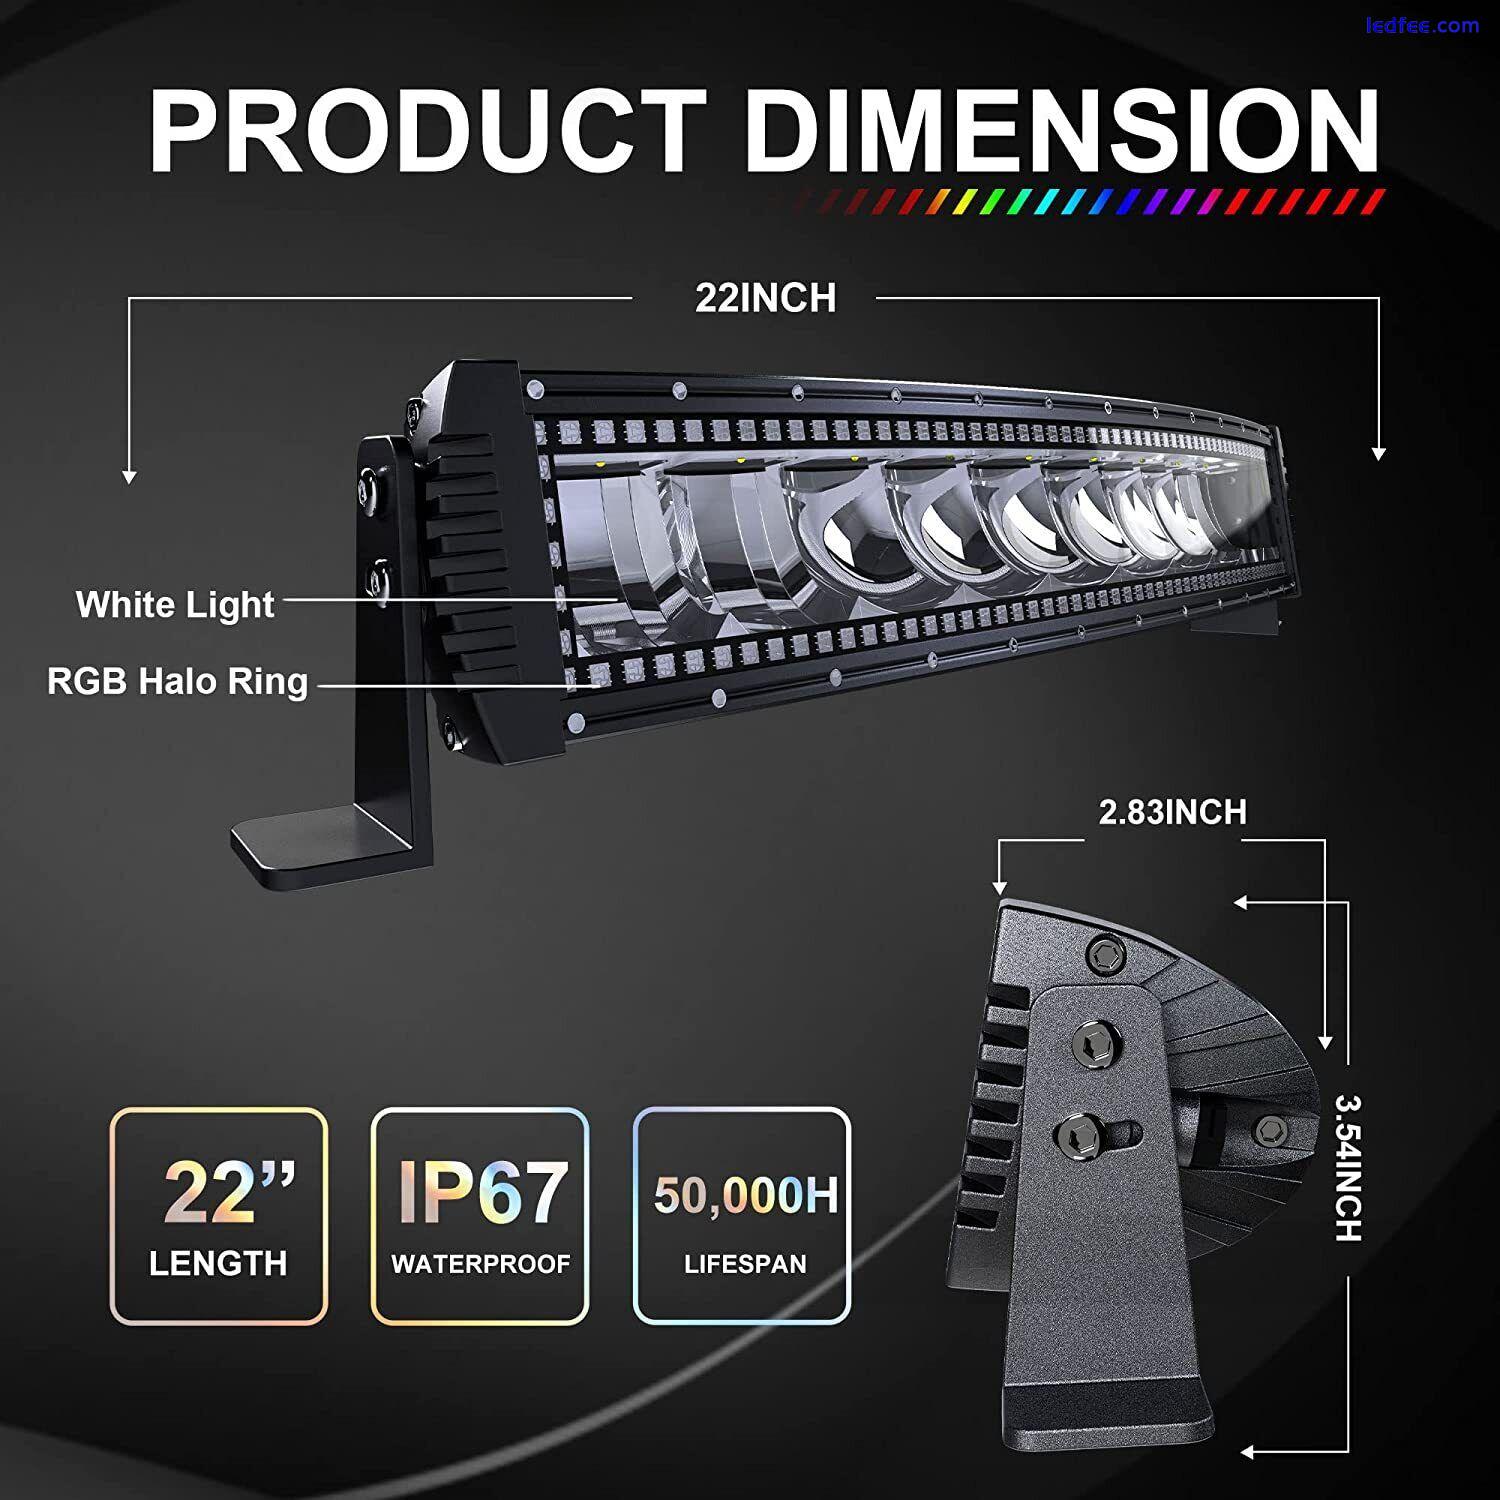 22INCH SPOT FLOOD COMBO 120W LED LIGHT BAR CURVED RGB HALO OFFROAD FOR SUV 4WD 0 